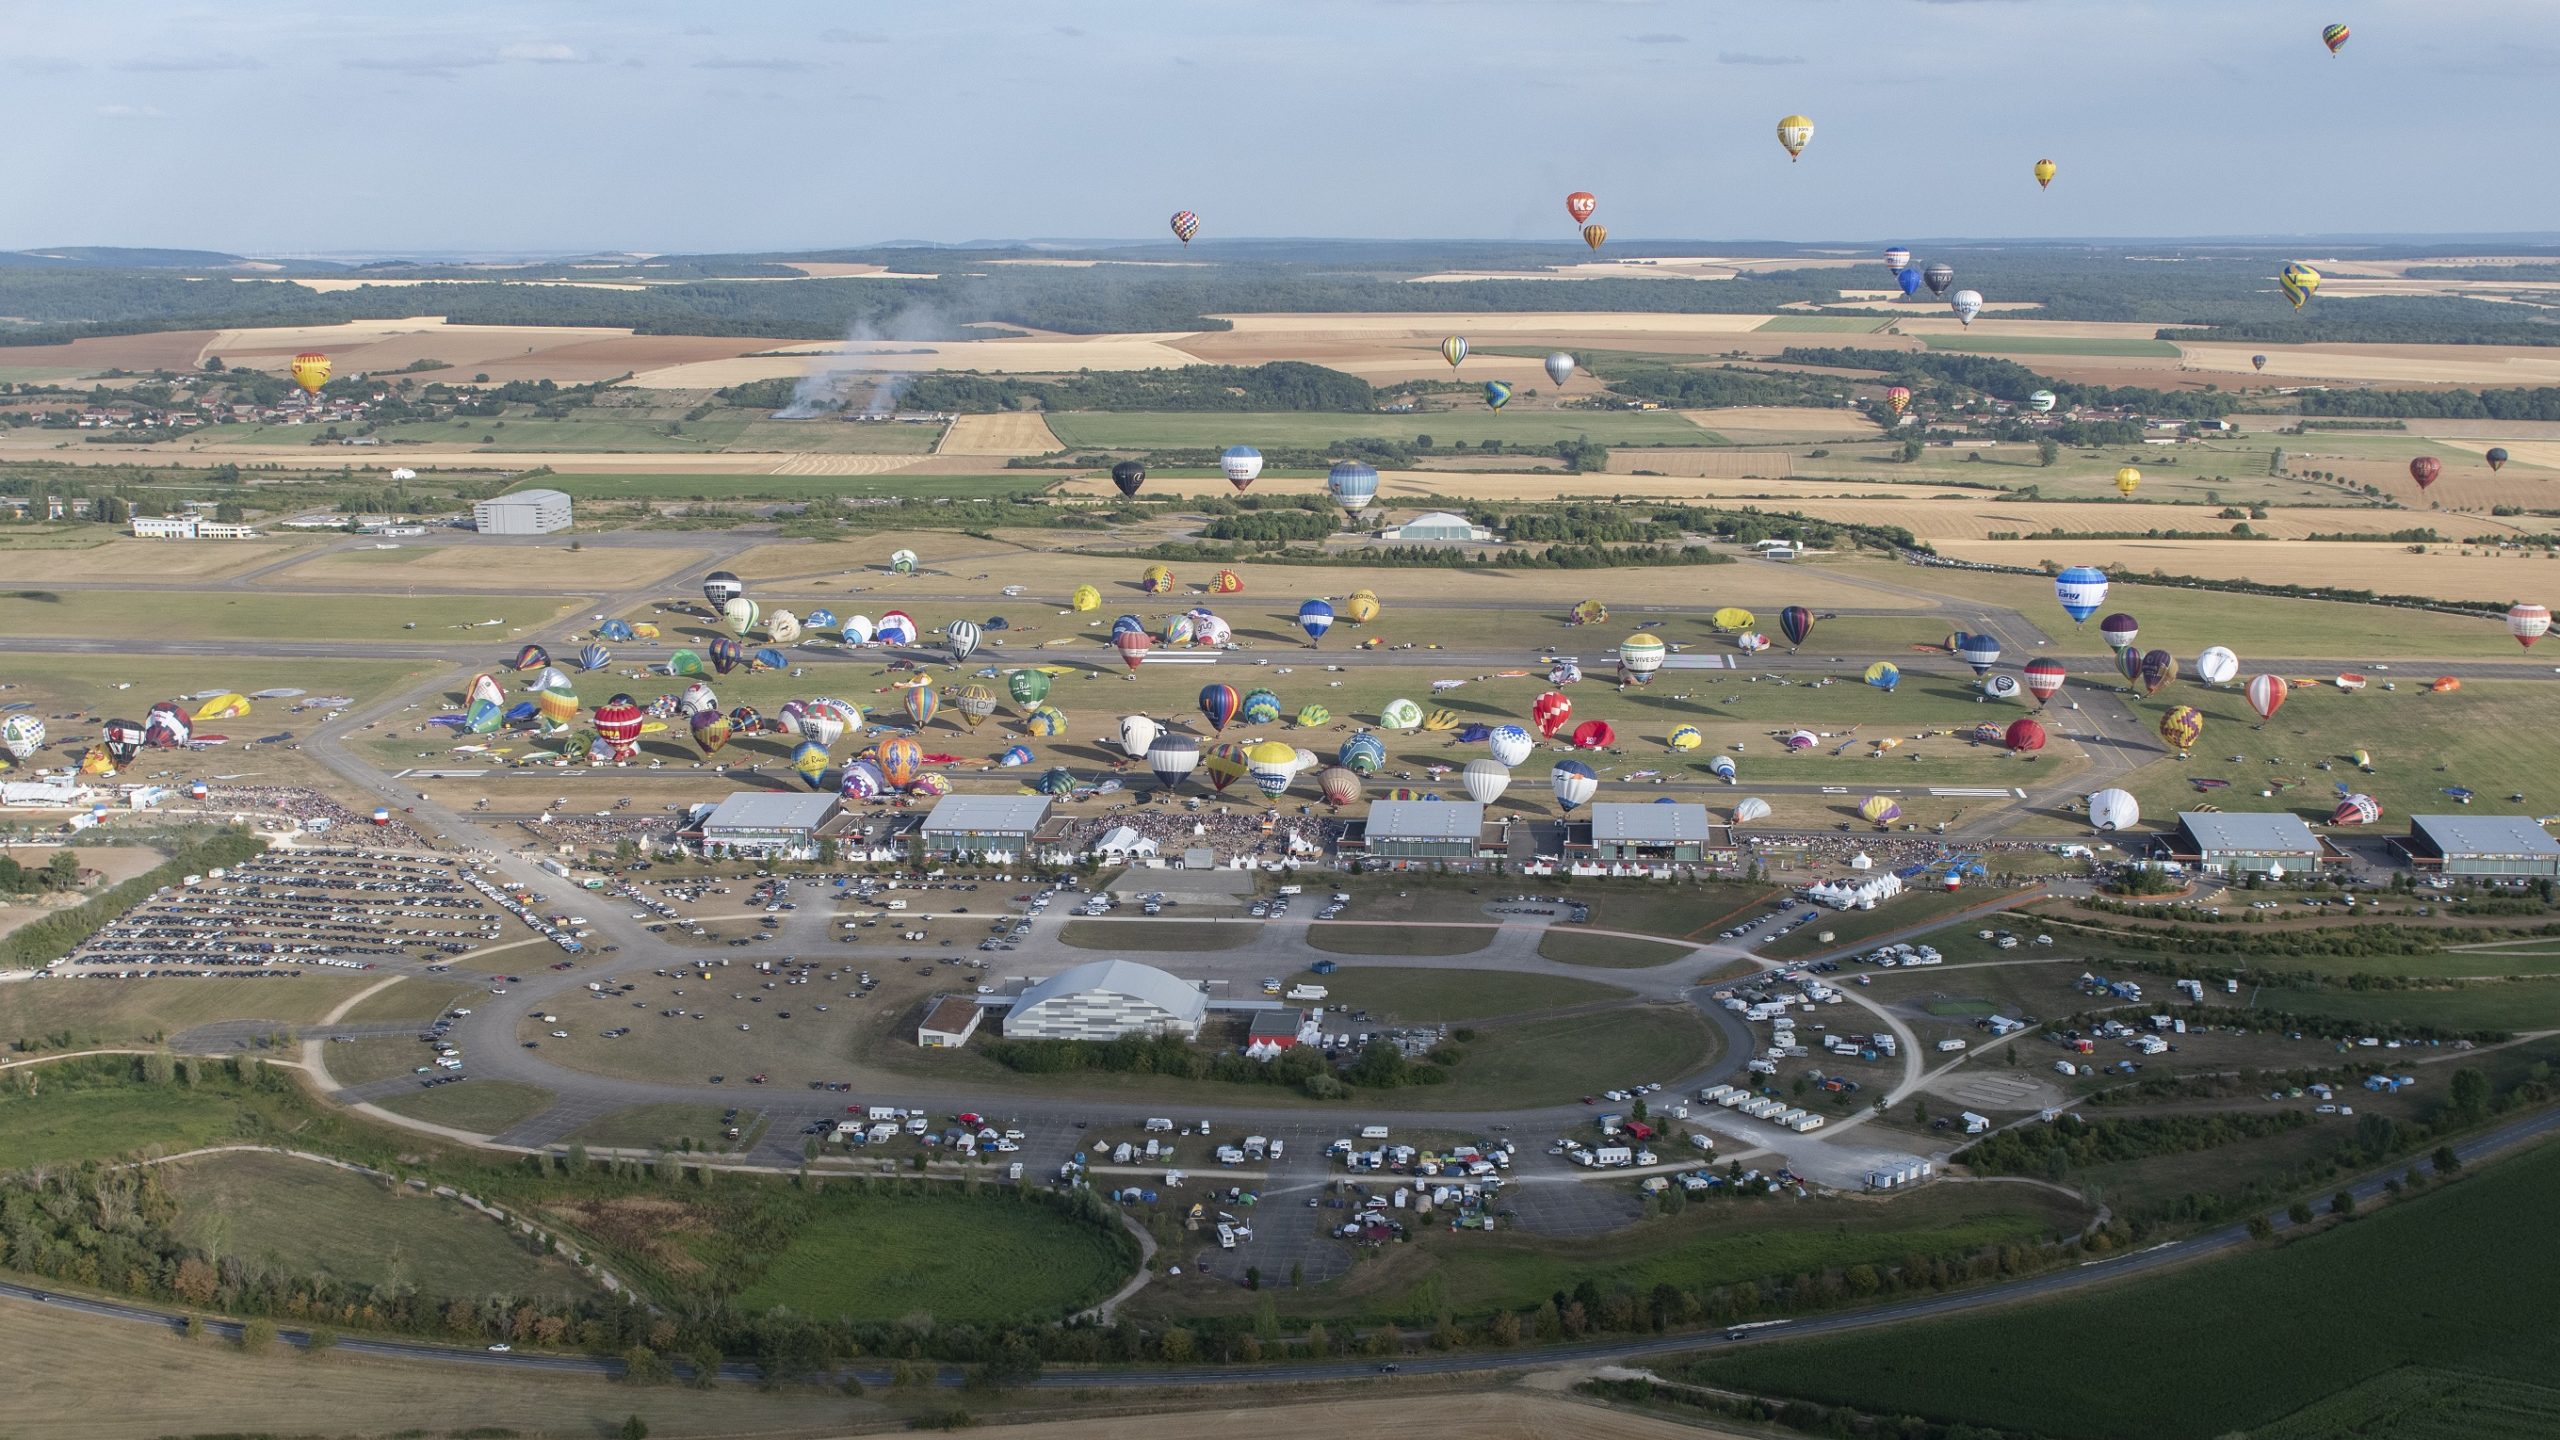 The activity does not weaken on the airfield of Chambley